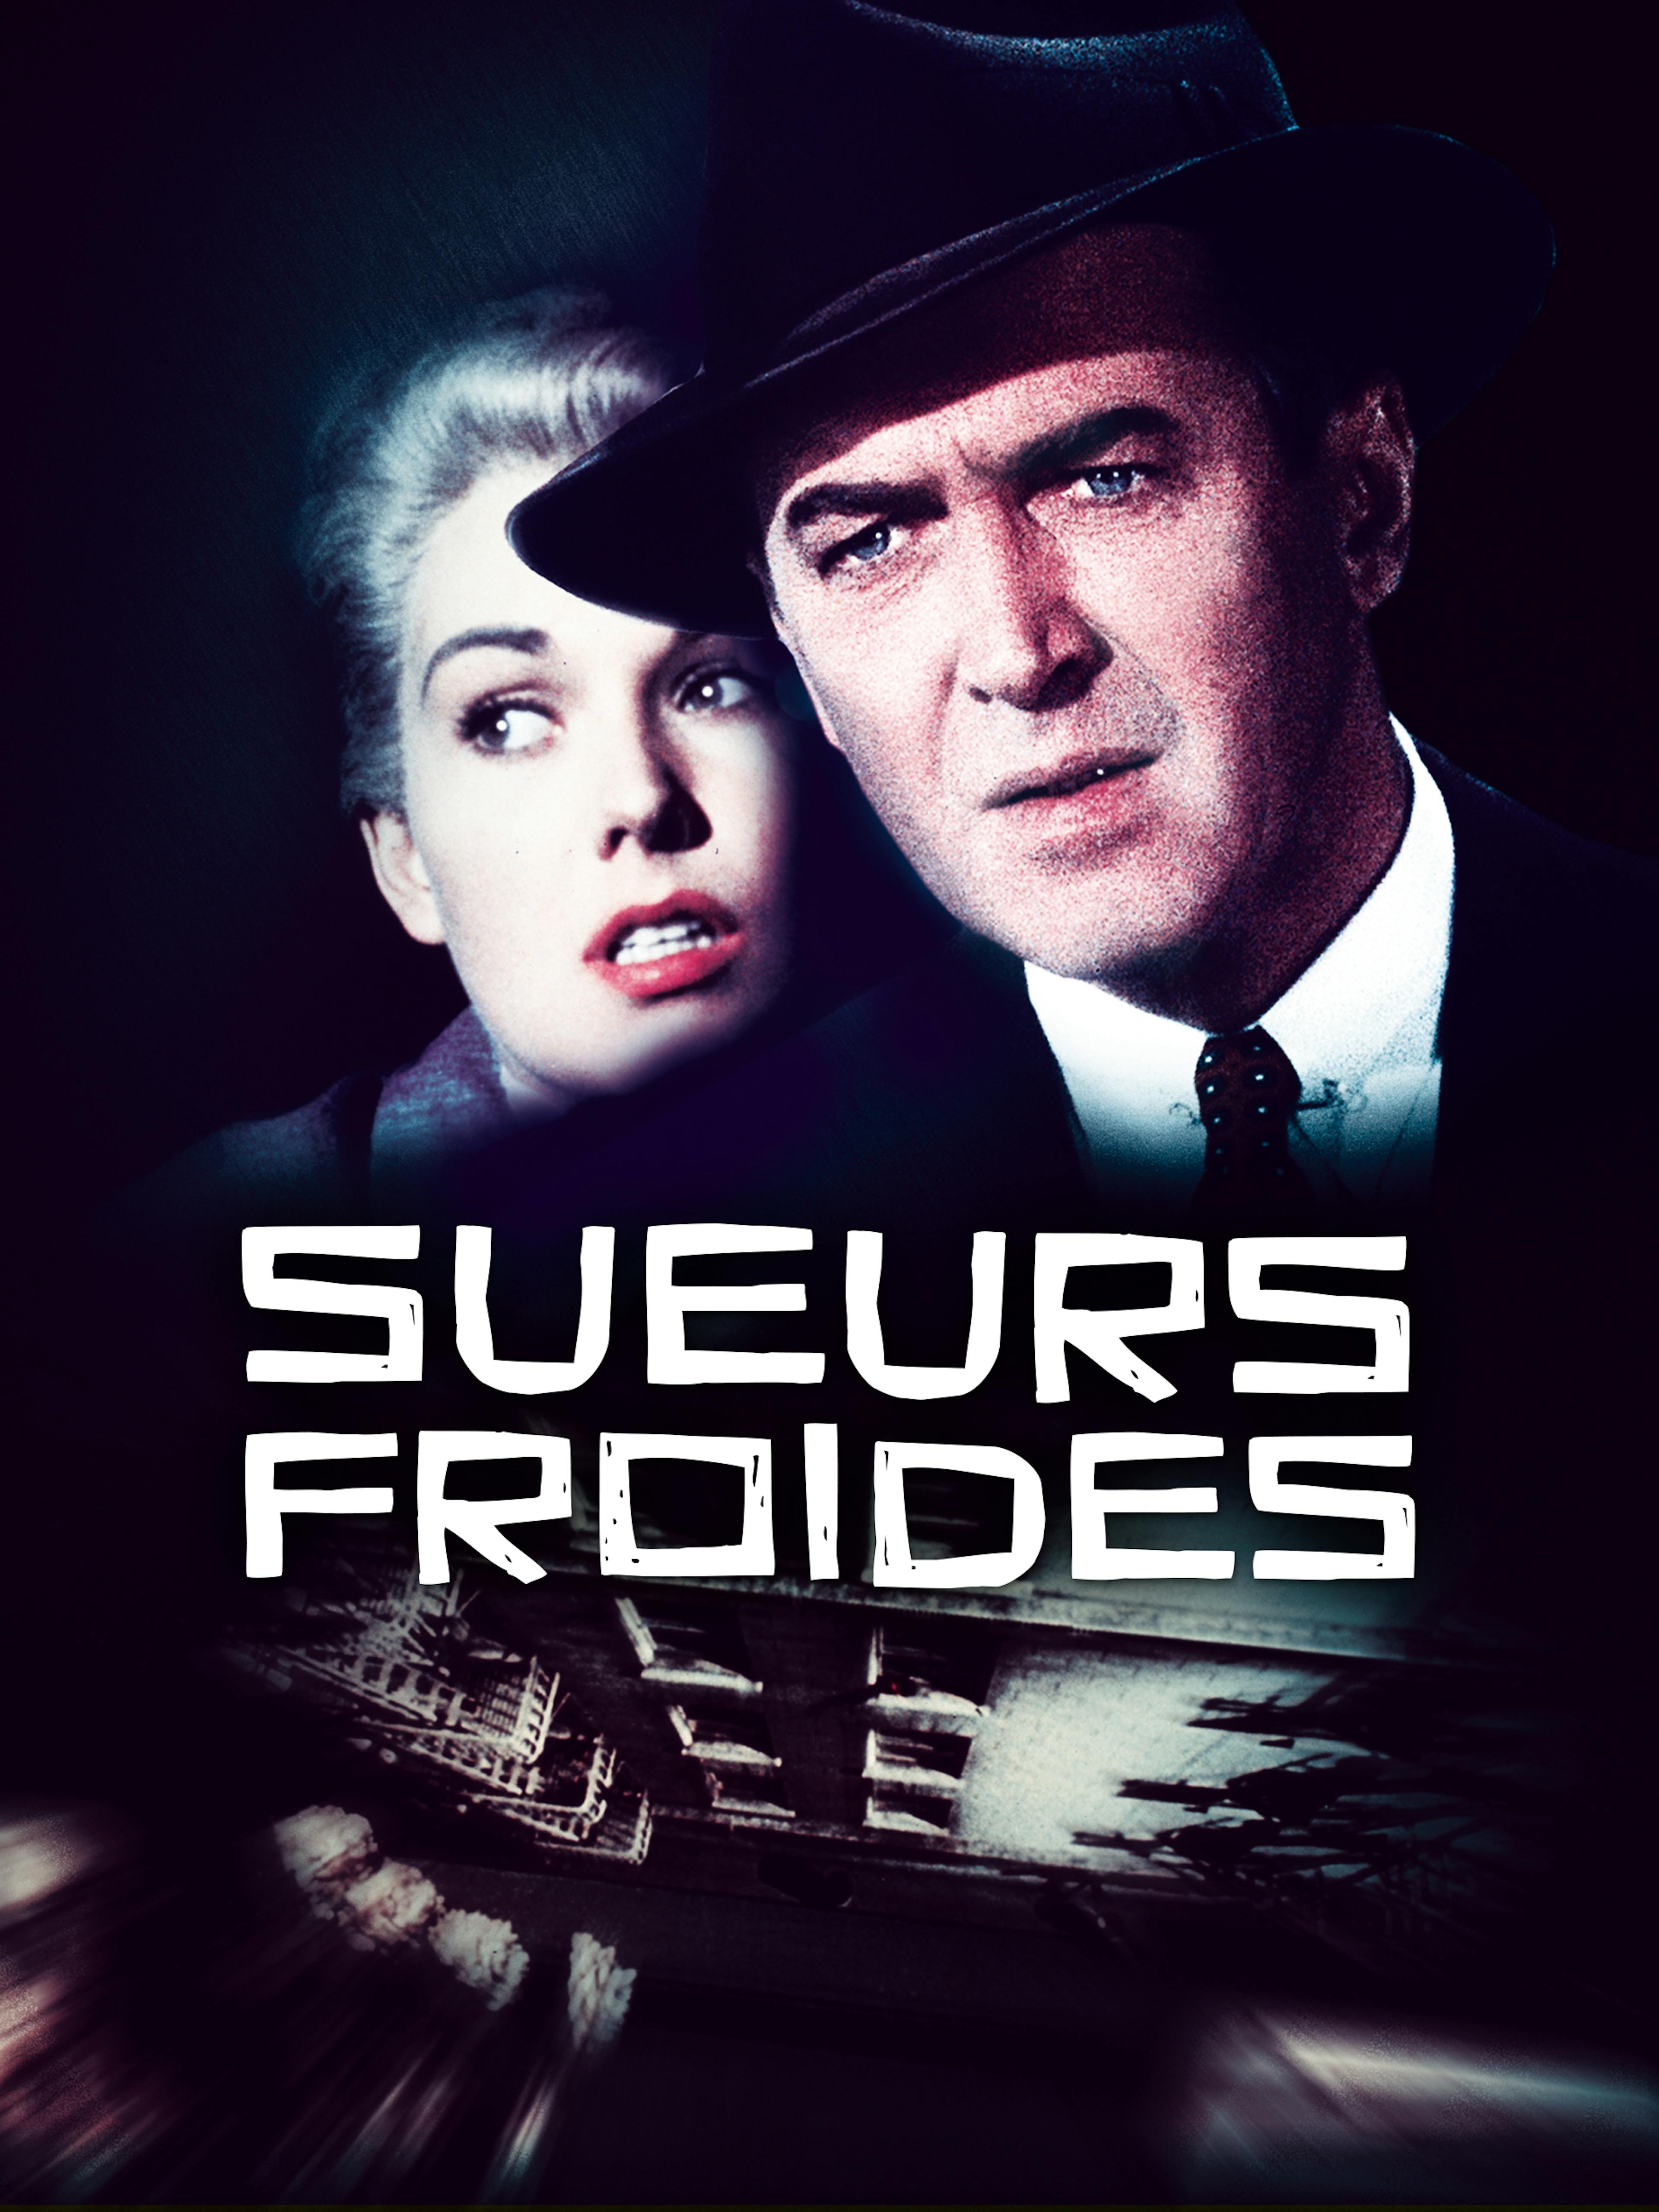 Sueurs froides